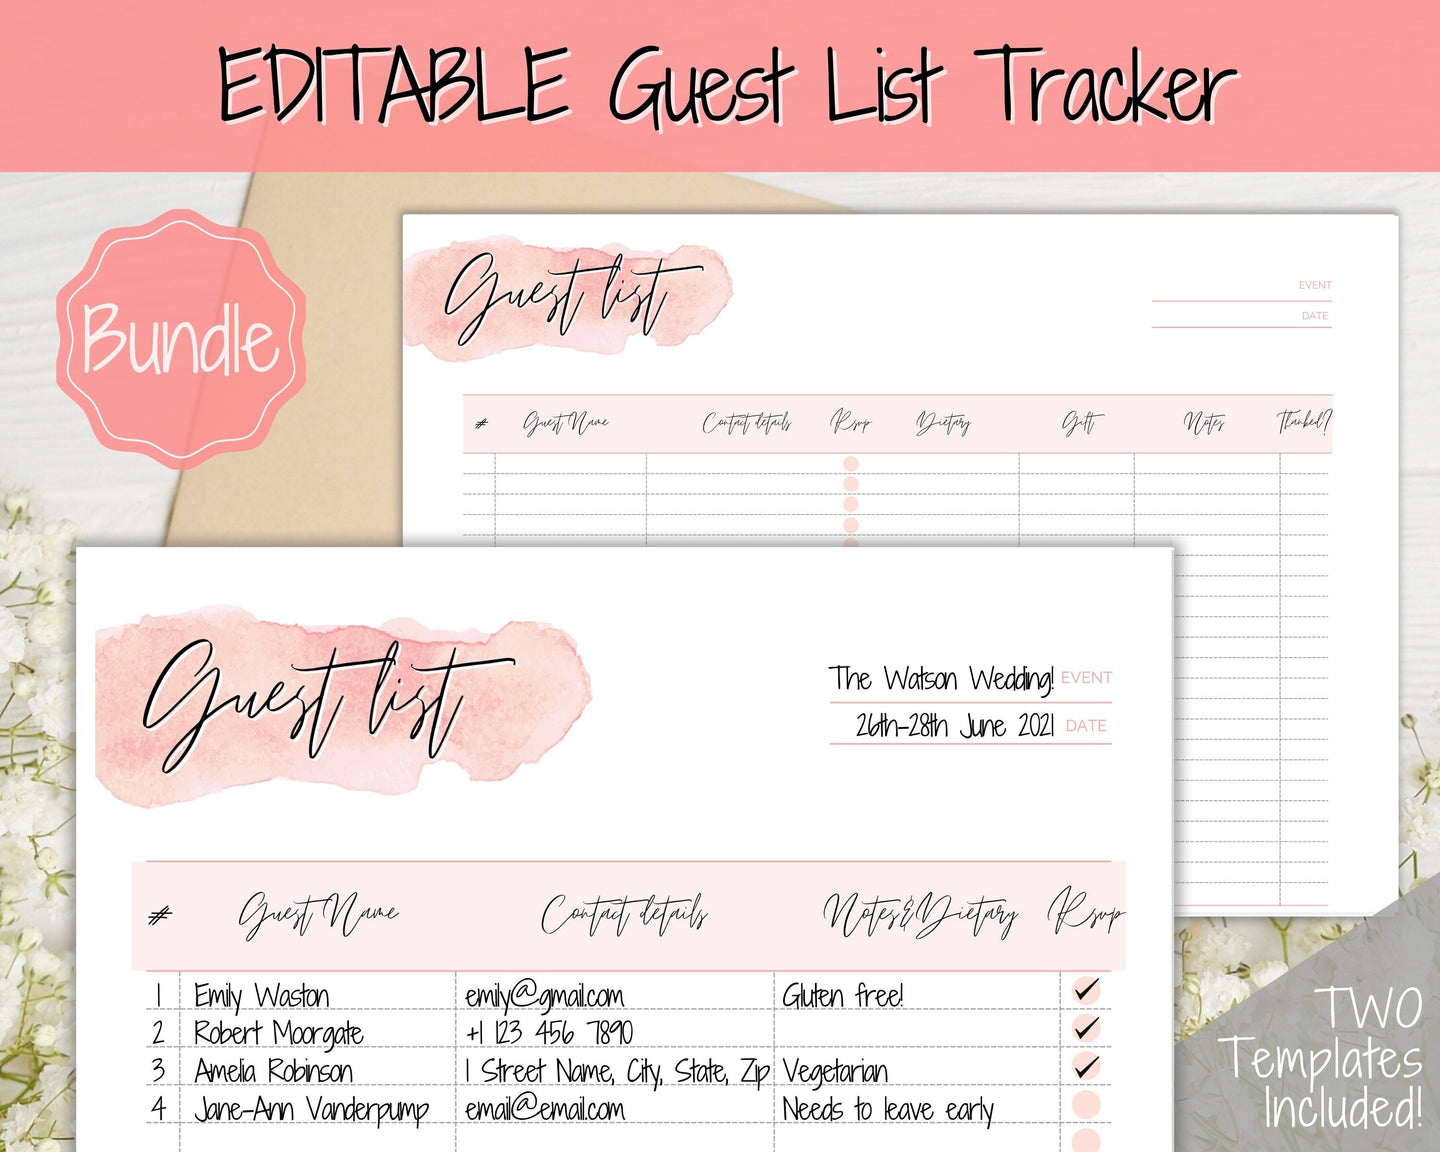 Guest List Template, Editable Guest List Tracker with RSVP, Party, Events, Birthday & Wedding Guest List, Wedding Planner Printable, Gifts | Style 3